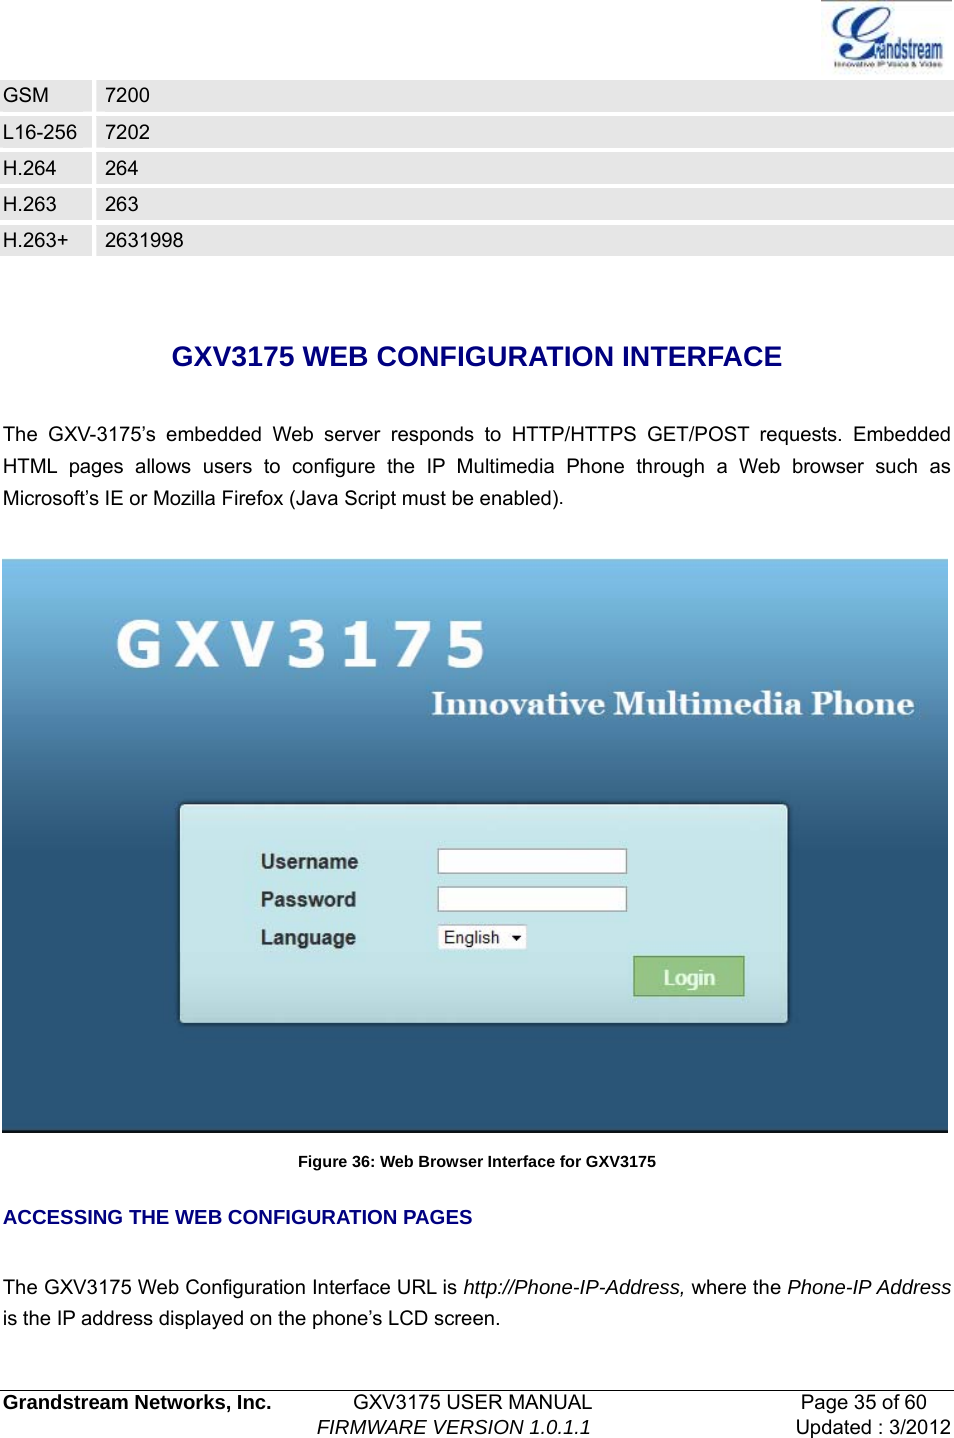   Grandstream Networks, Inc.        GXV3175 USER MANUAL                     Page 35 of 60                                FIRMWARE VERSION 1.0.1.1 Updated : 3/2012  GSM  7200 L16-256  7202 H.264  264 H.263  263 H.263+  2631998  GXV3175 WEB CONFIGURATION INTERFACE  The GXV-3175’s embedded Web server responds to HTTP/HTTPS GET/POST requests. Embedded HTML pages allows users to configure the IP Multimedia Phone through a Web browser such as Microsoft’s IE or Mozilla Firefox (Java Script must be enabled).     Figure 36: Web Browser Interface for GXV3175 ACCESSING THE WEB CONFIGURATION PAGES  The GXV3175 Web Configuration Interface URL is http://Phone-IP-Address, where the Phone-IP Address is the IP address displayed on the phone’s LCD screen.  